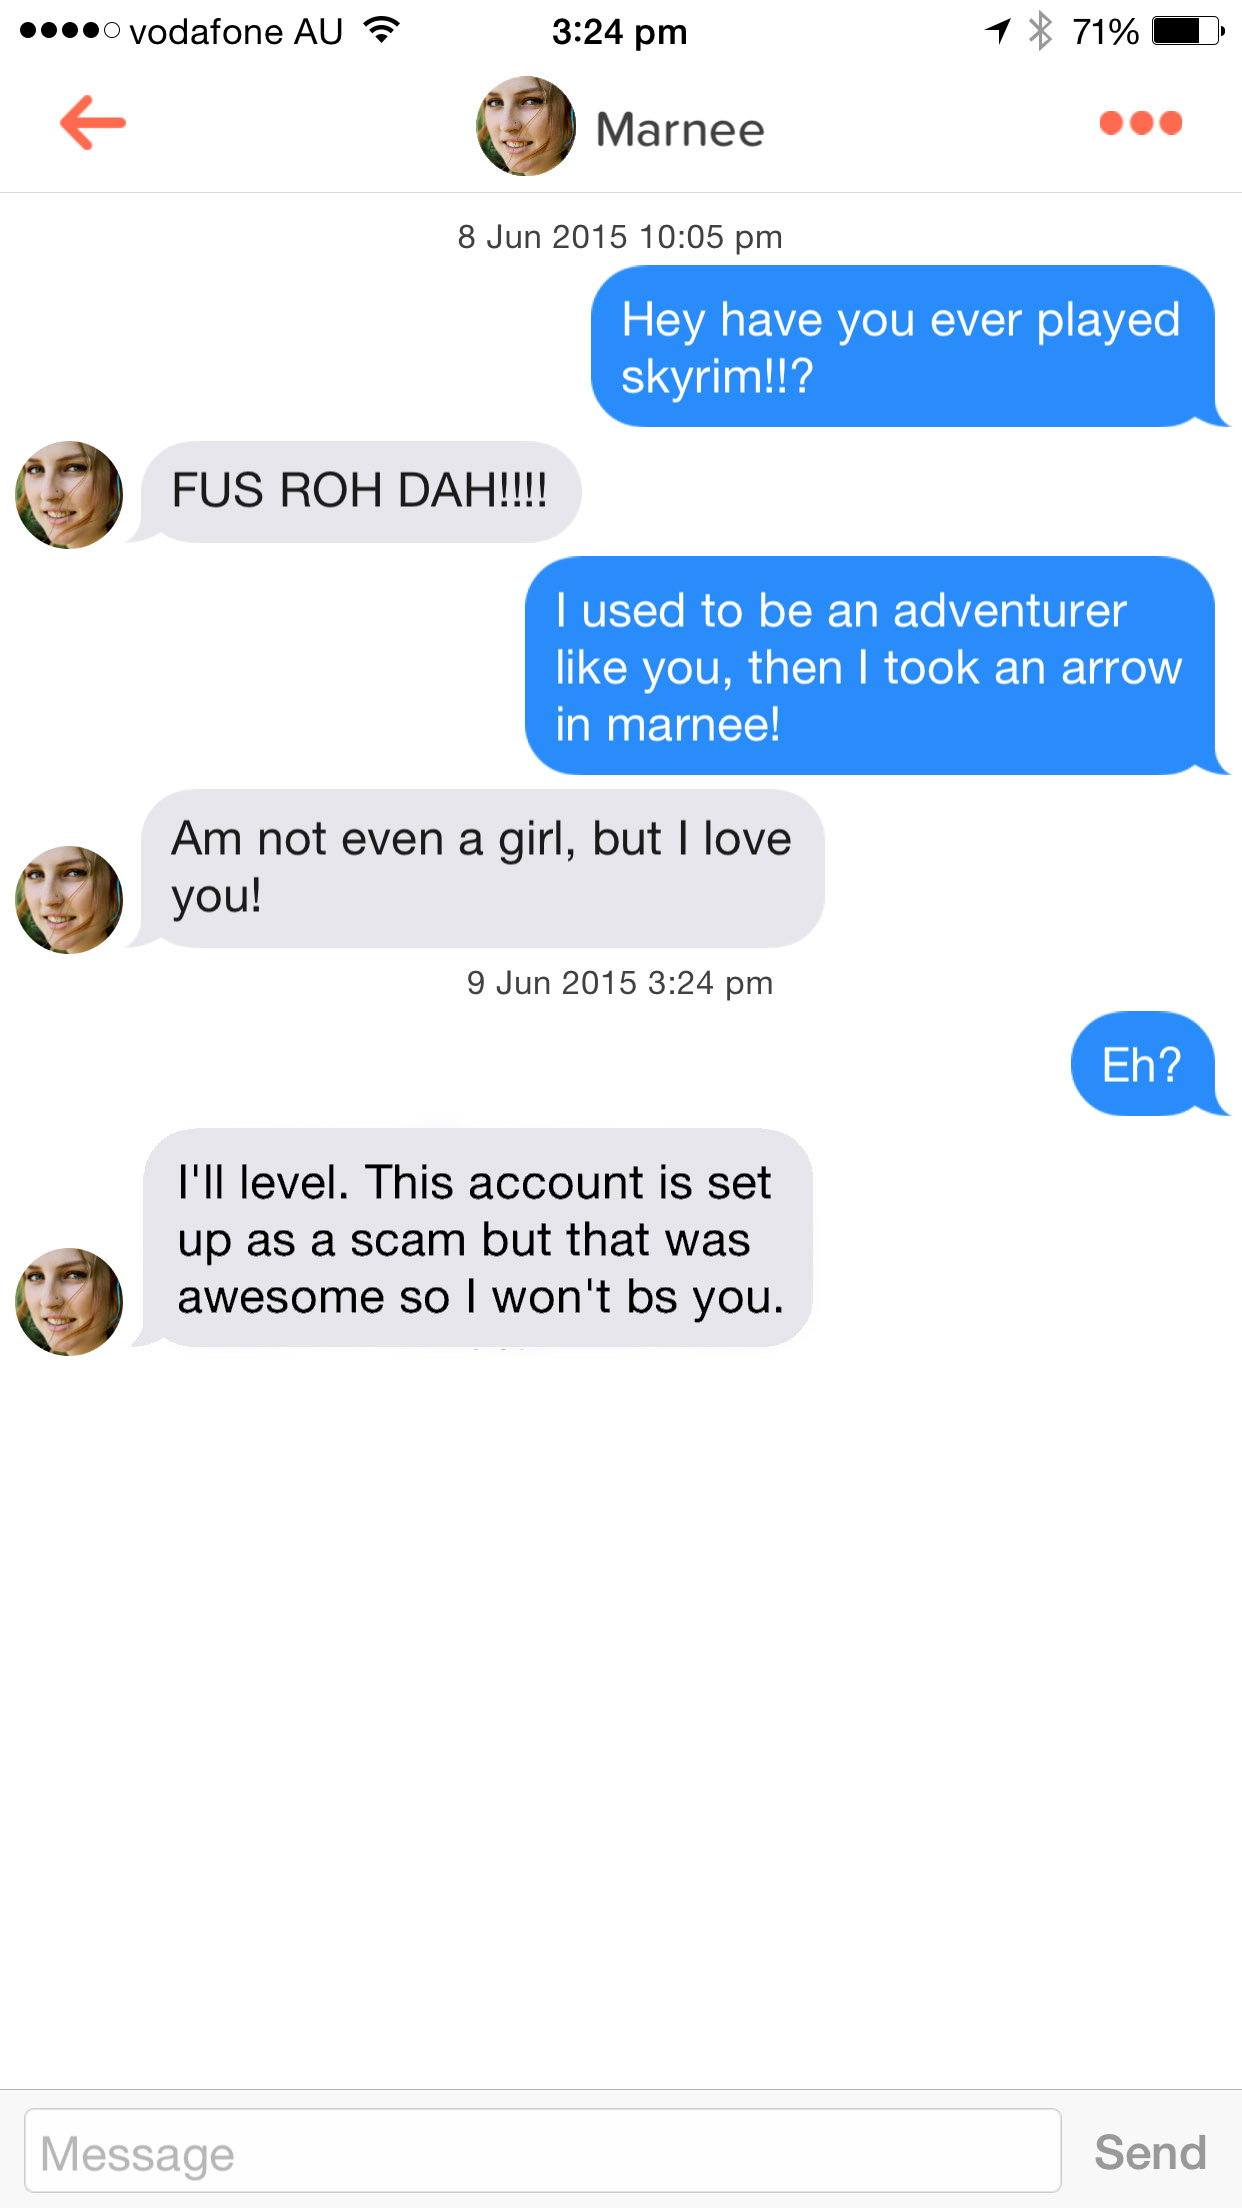 scammer be like - ....o vodafone Au 1 71% Marnee Hey have you ever played skyrim!!? Fus Roh Dah!!!! I used to be an adventurer you, then I took an arrow in marnee! Am not even a girl, but I love you! Eh? I'll level. This account is set up as a scam but th